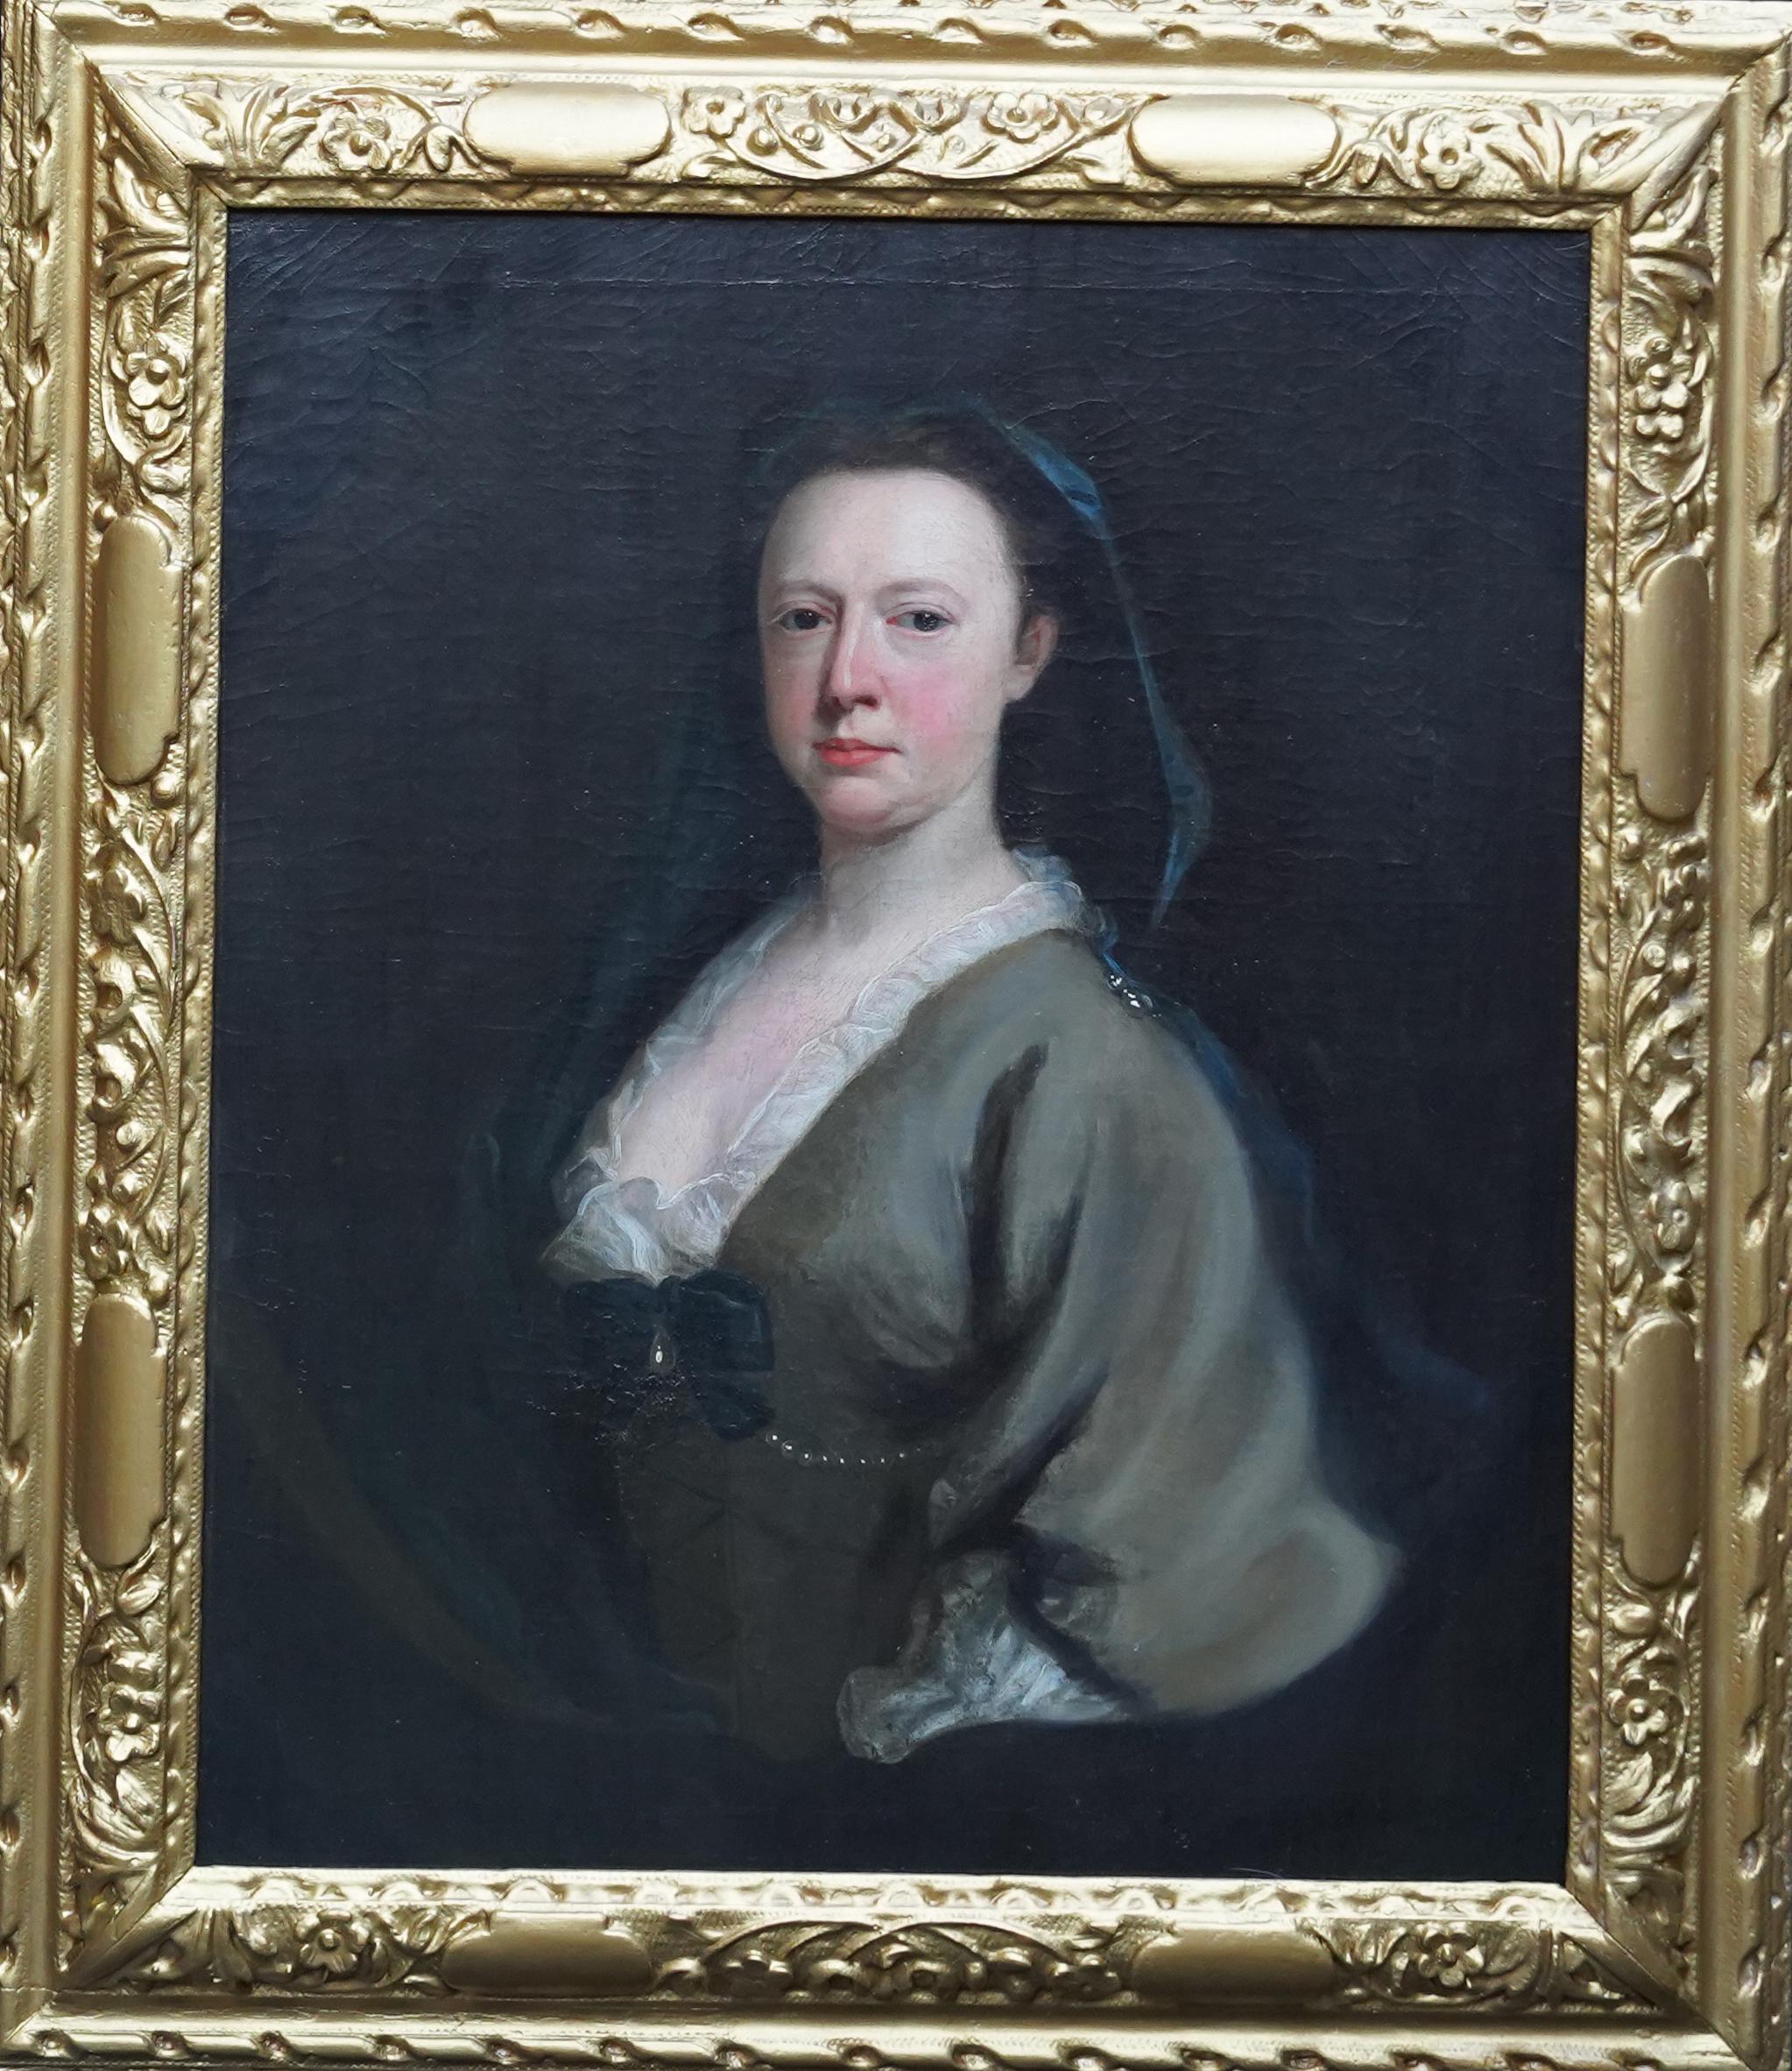 Sir Godfrey Kneller Portrait Painting - Portrait of a Lady - British 17th century art Old Master portrait oil painting